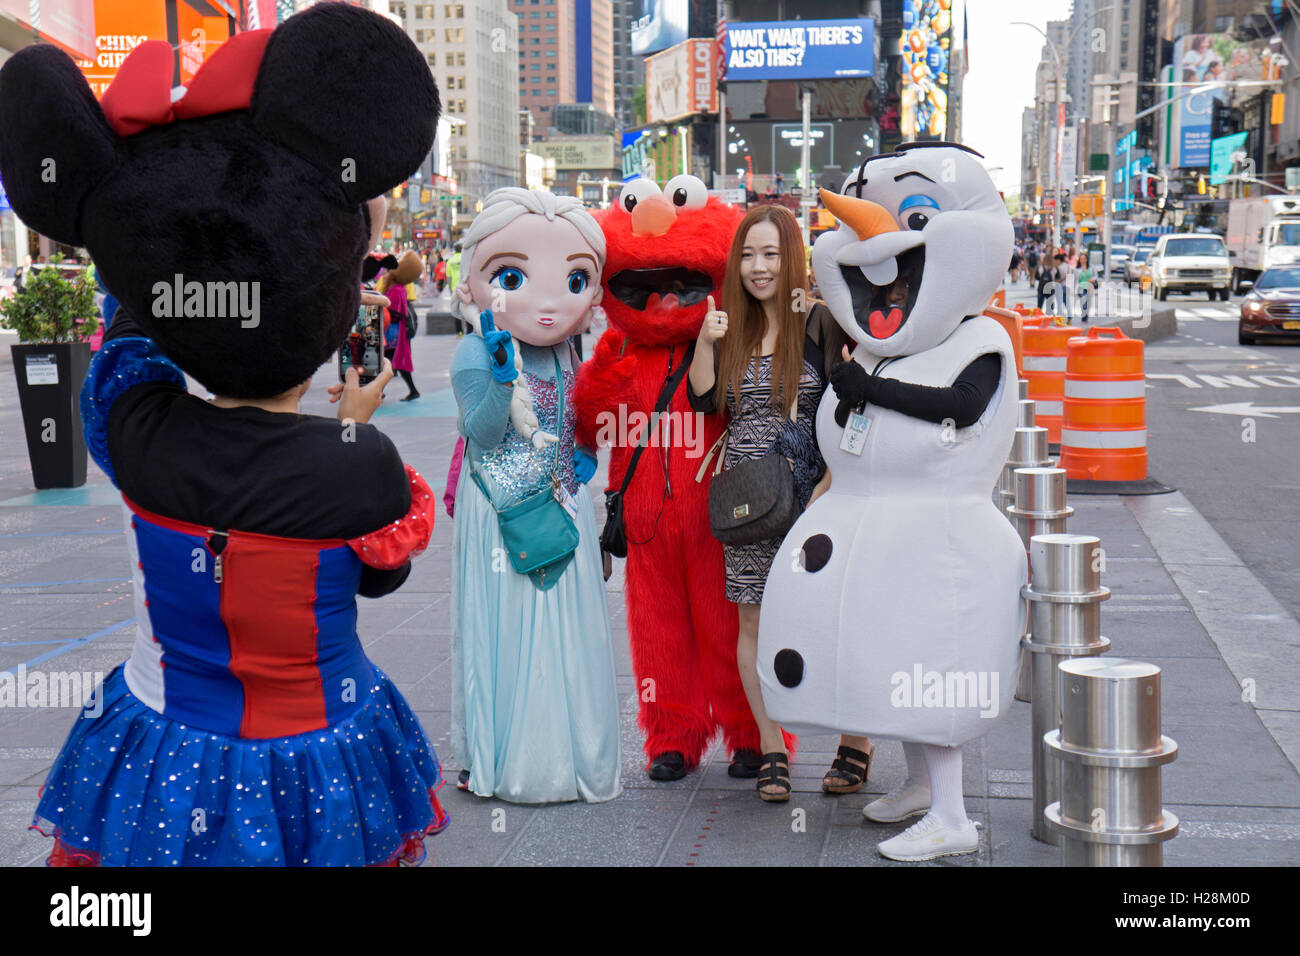 Cartoon & comic characters solicit tourists in Times Square in New York to pose for photos in exchange for a tip. Stock Photo